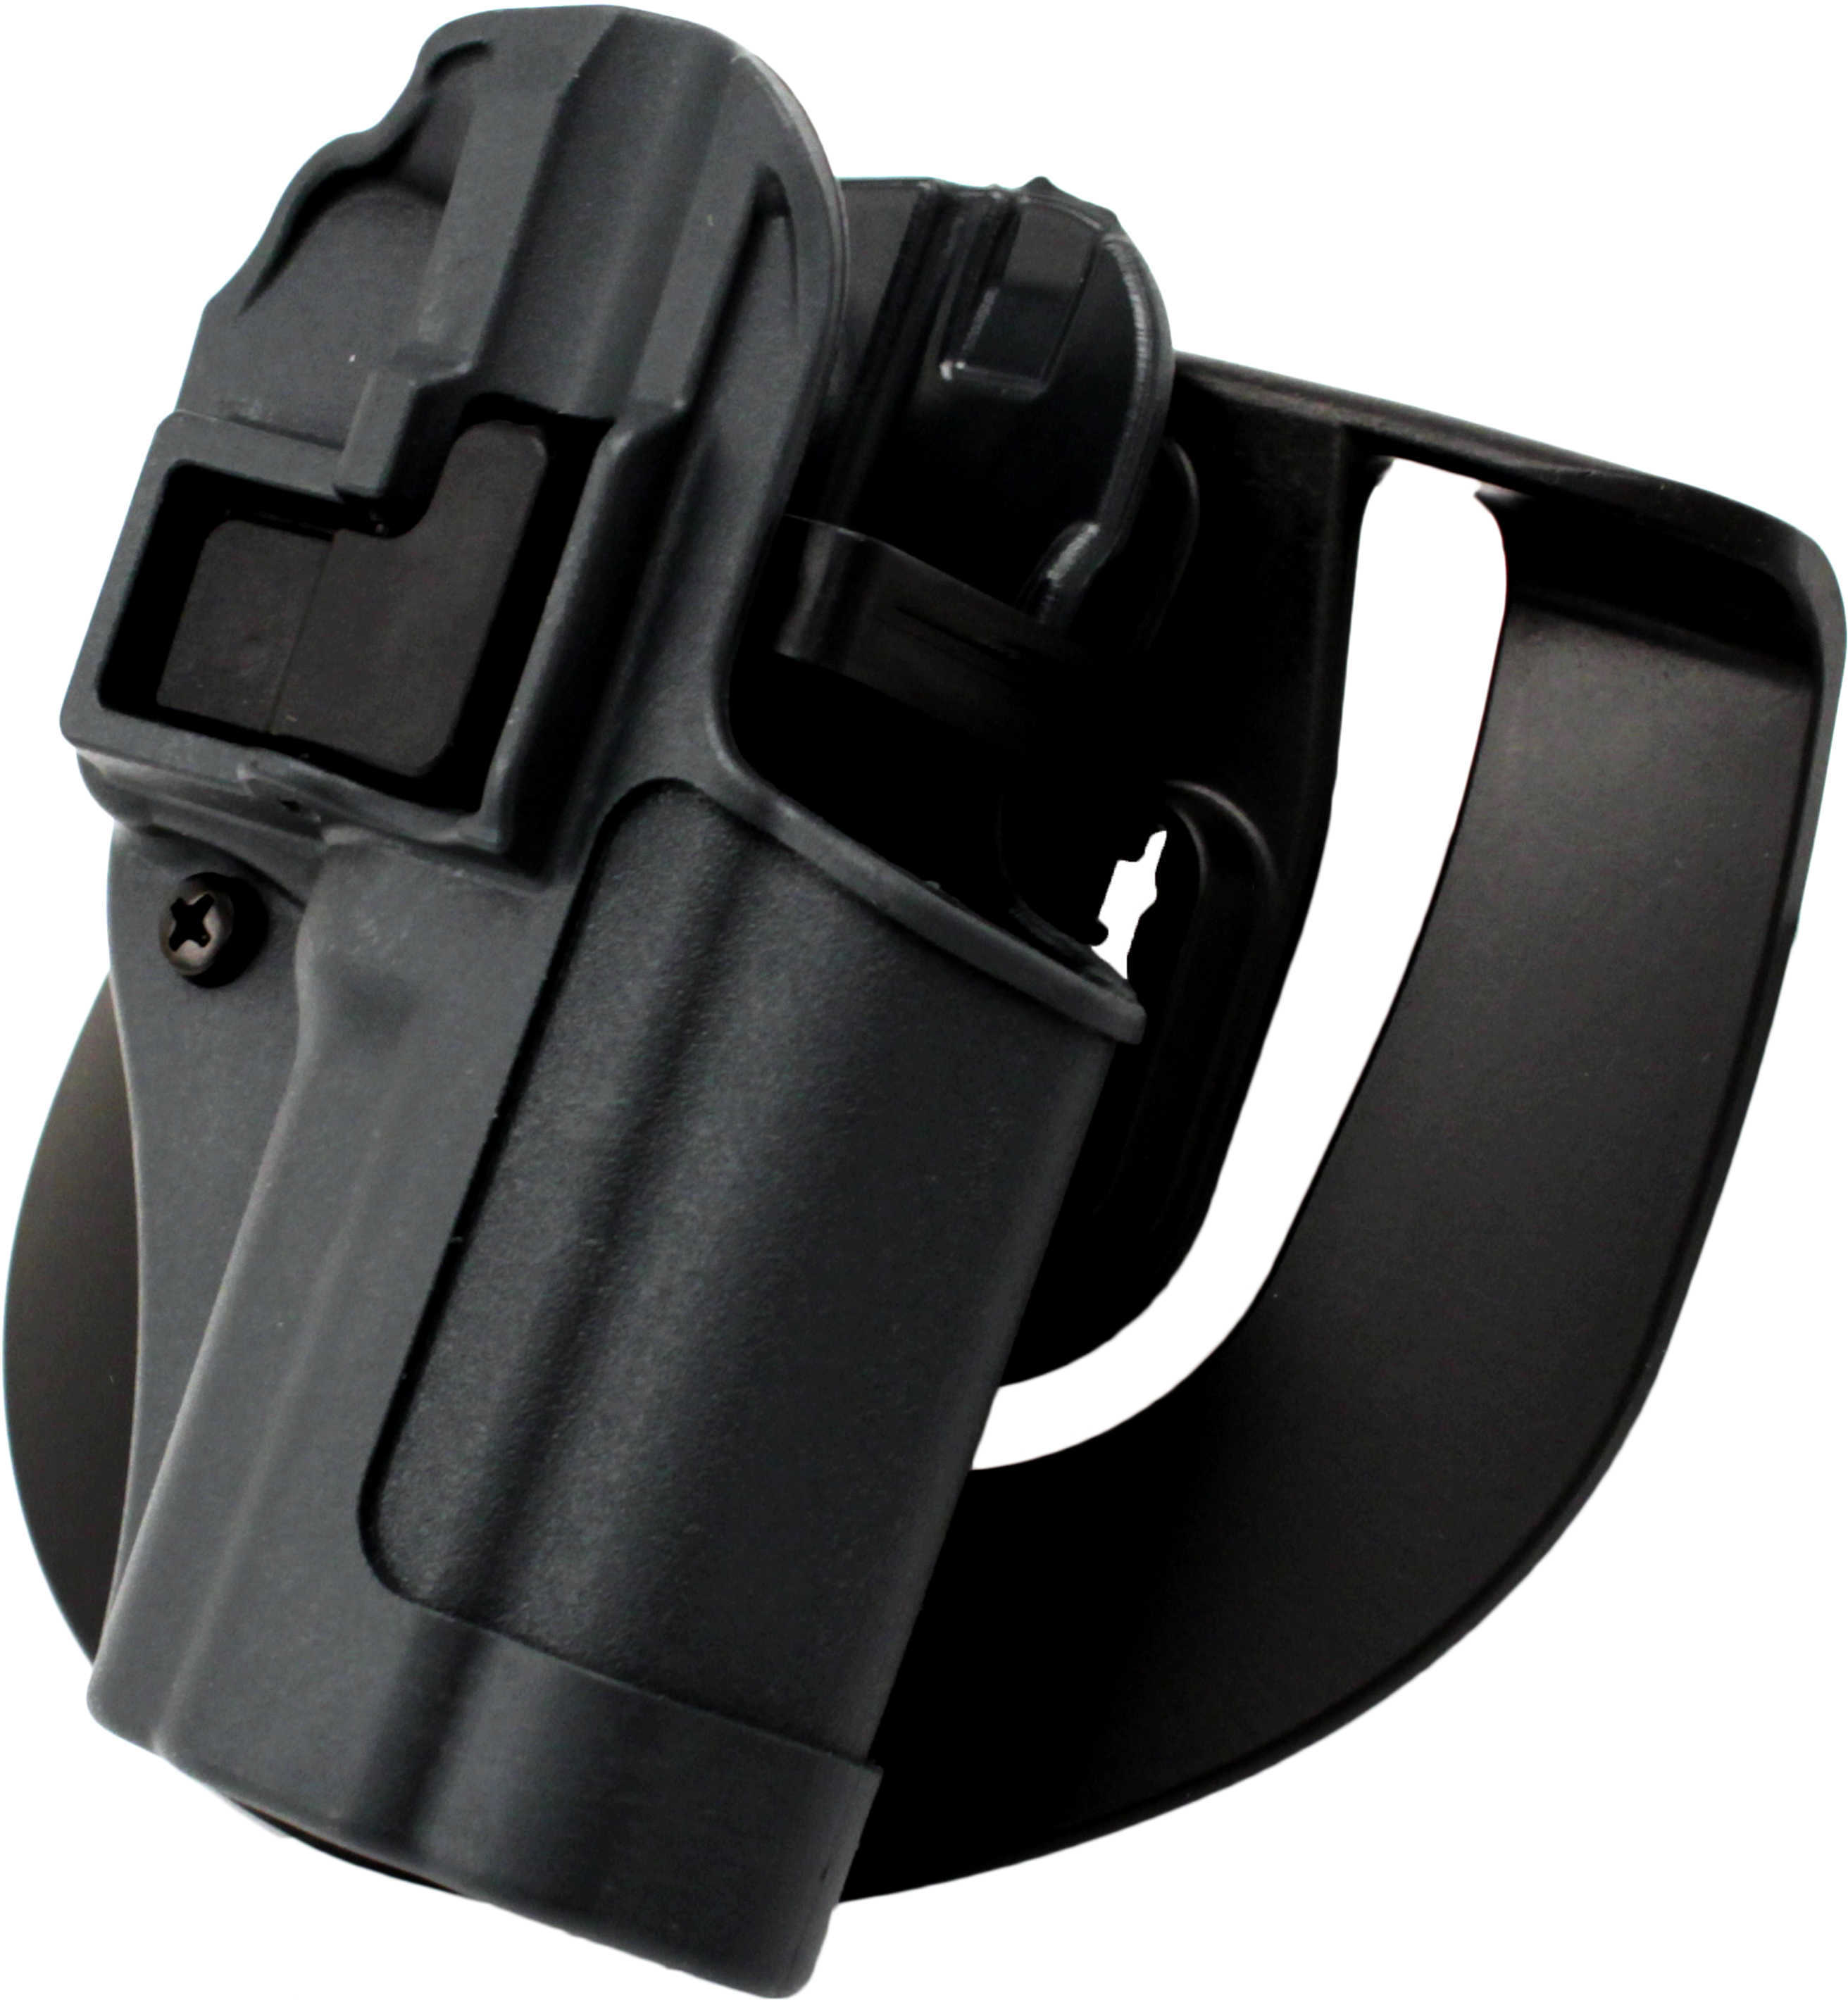 BlackHawk Products Group Serpa Sportster Belt Holster Right Hand Springfield XD Compact 413507BK-R